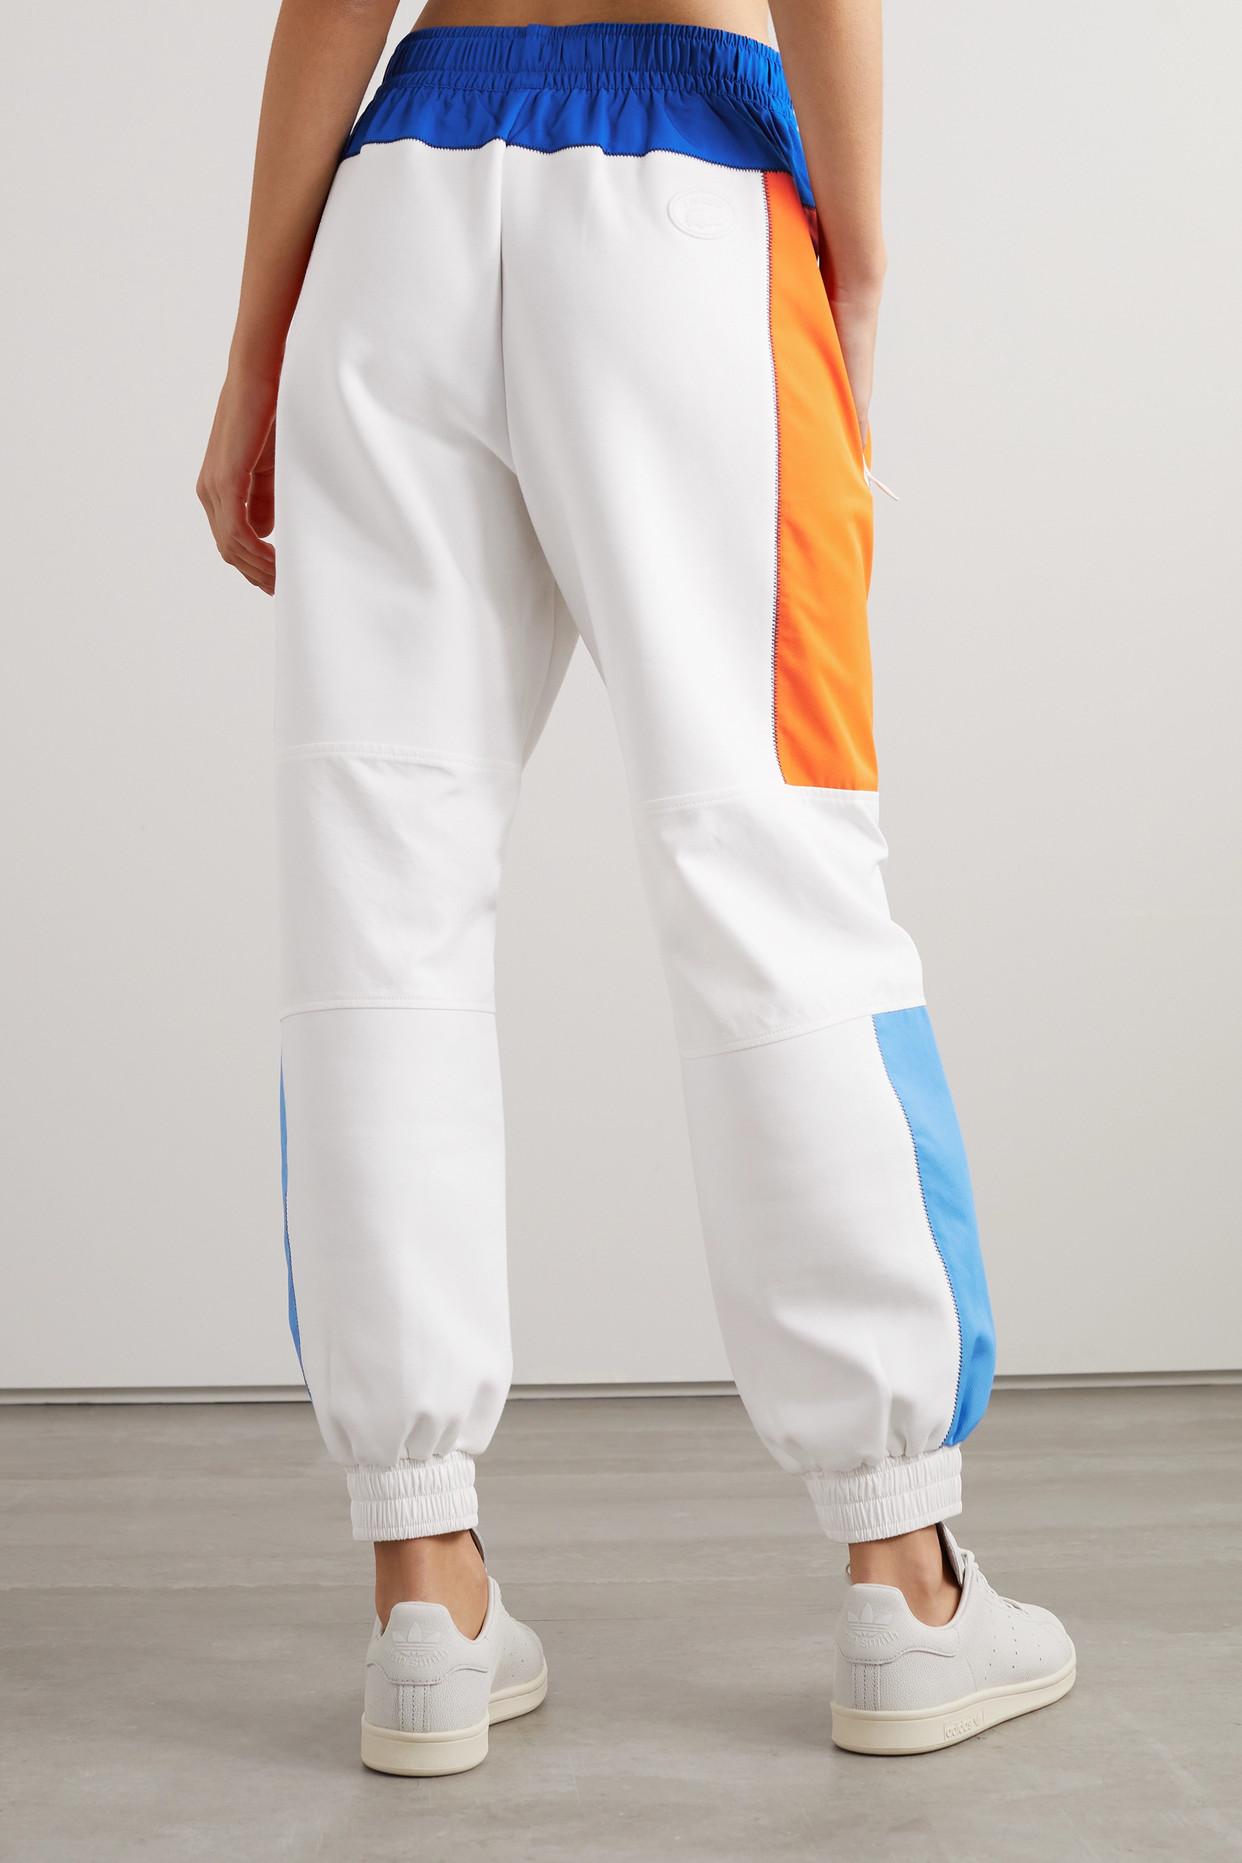 in Color-block | Lacoste Pants Blue Track Cotton-blend Jersey Lyst Ripstop-paneled